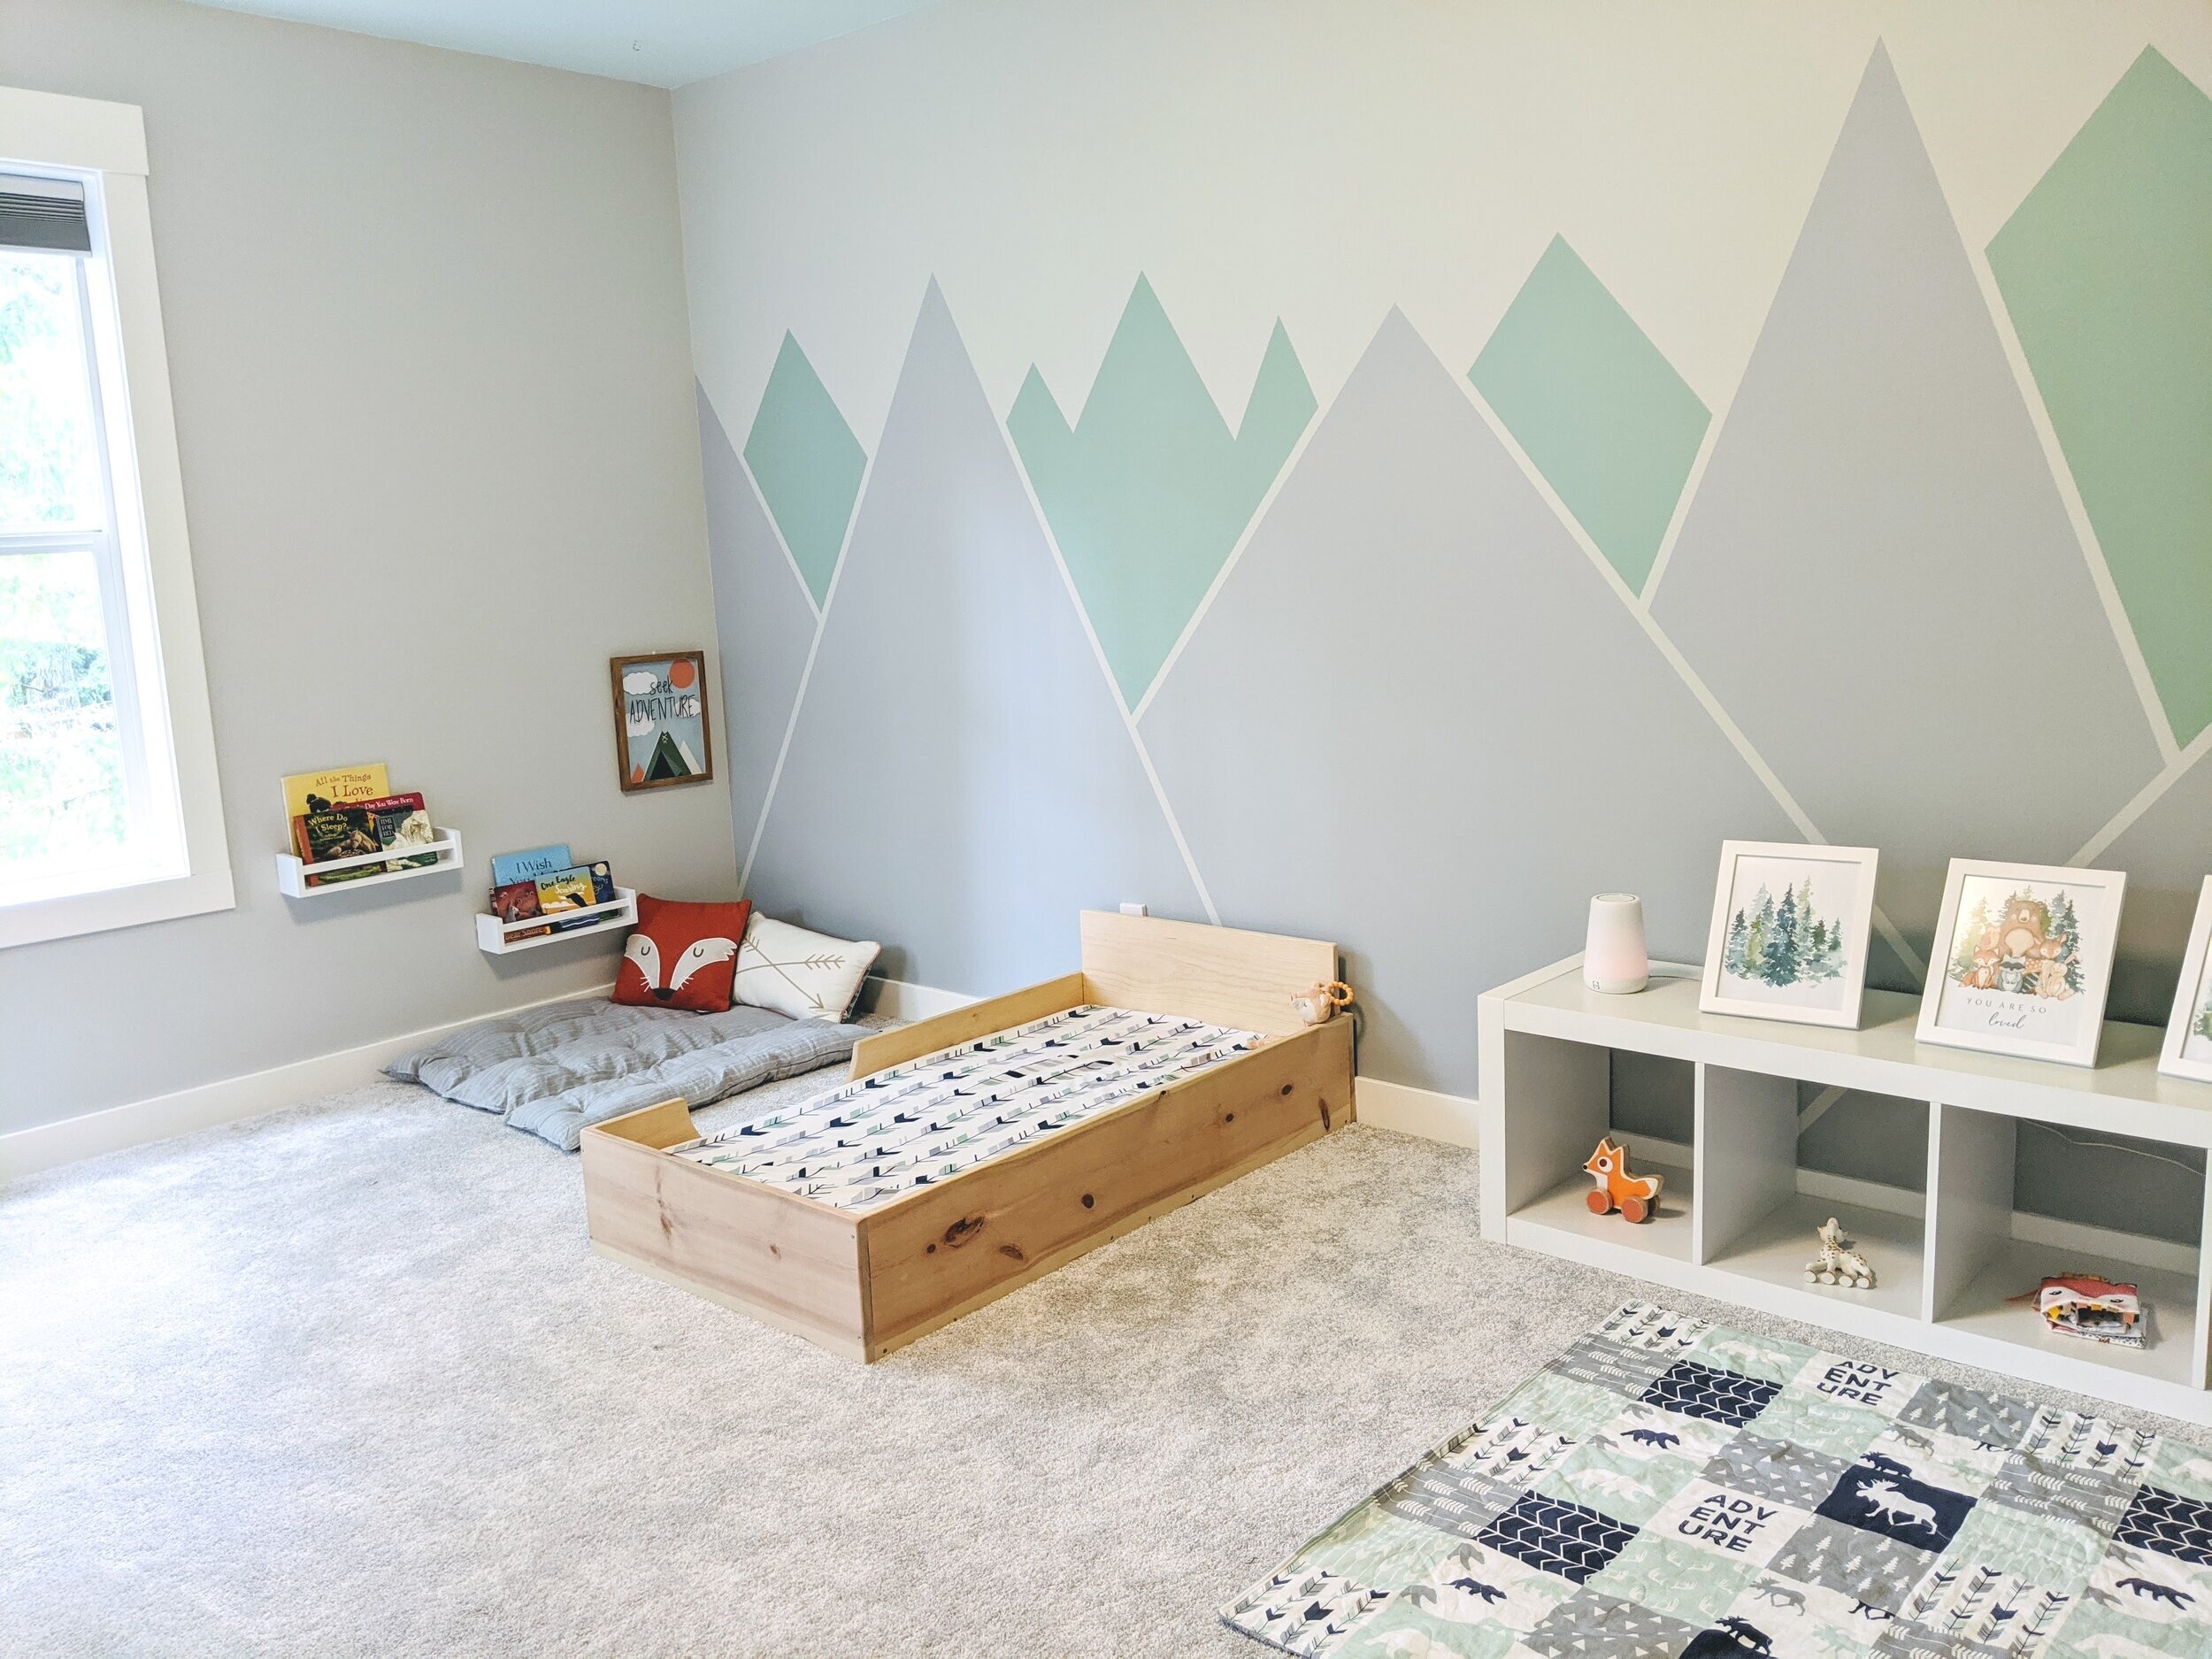 Sleep And Floor Bed Tips With, Infant Floor Bed Frame